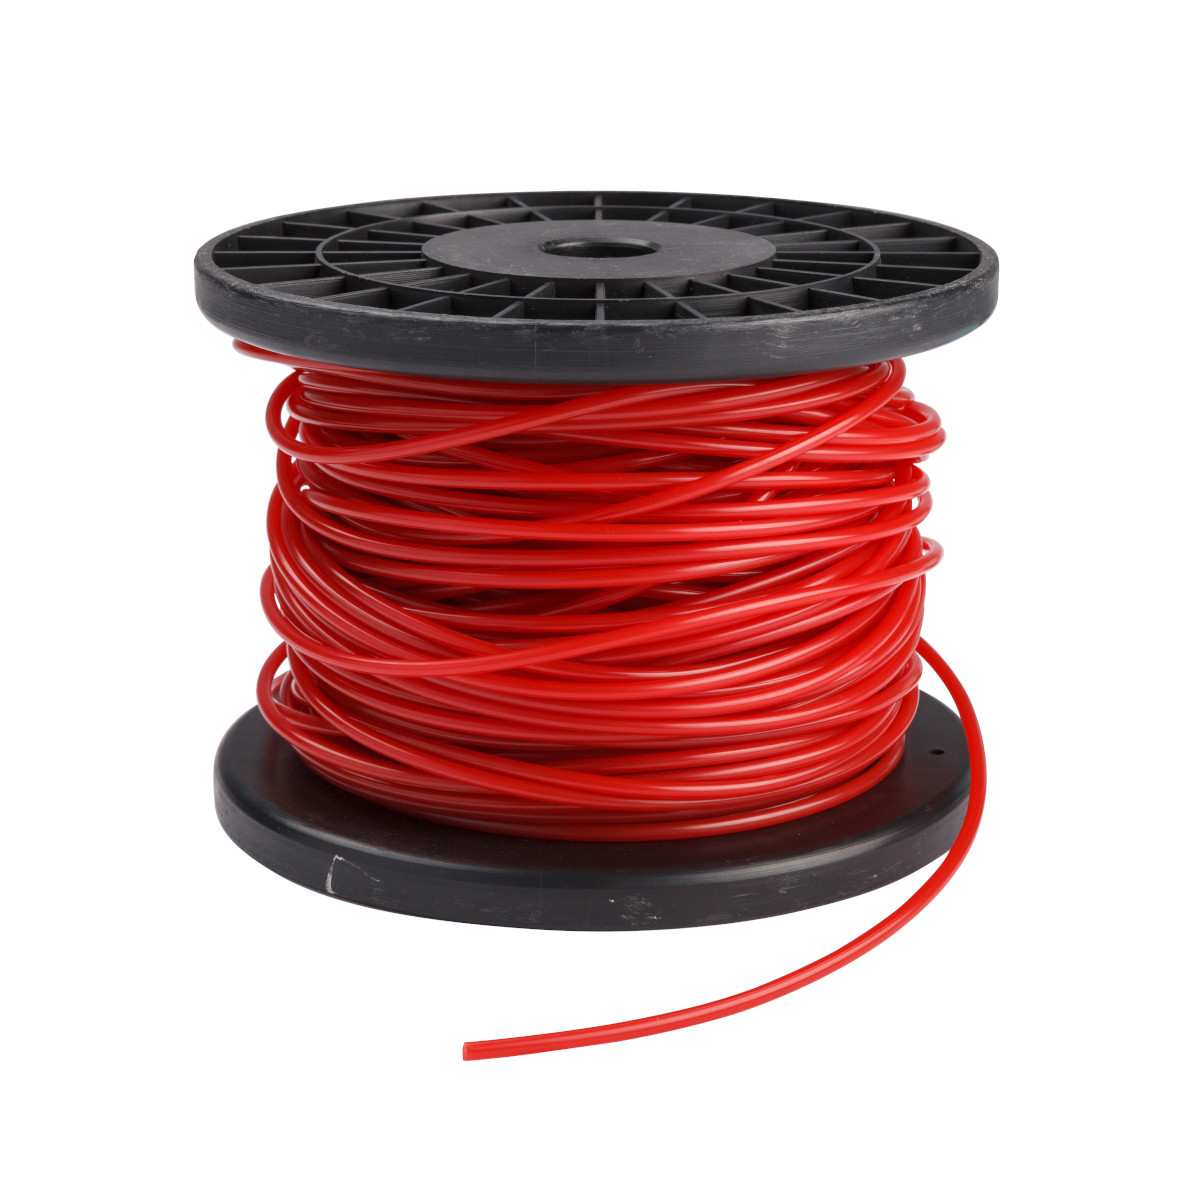 【170379】LOTO NYL CABLE SPOOL